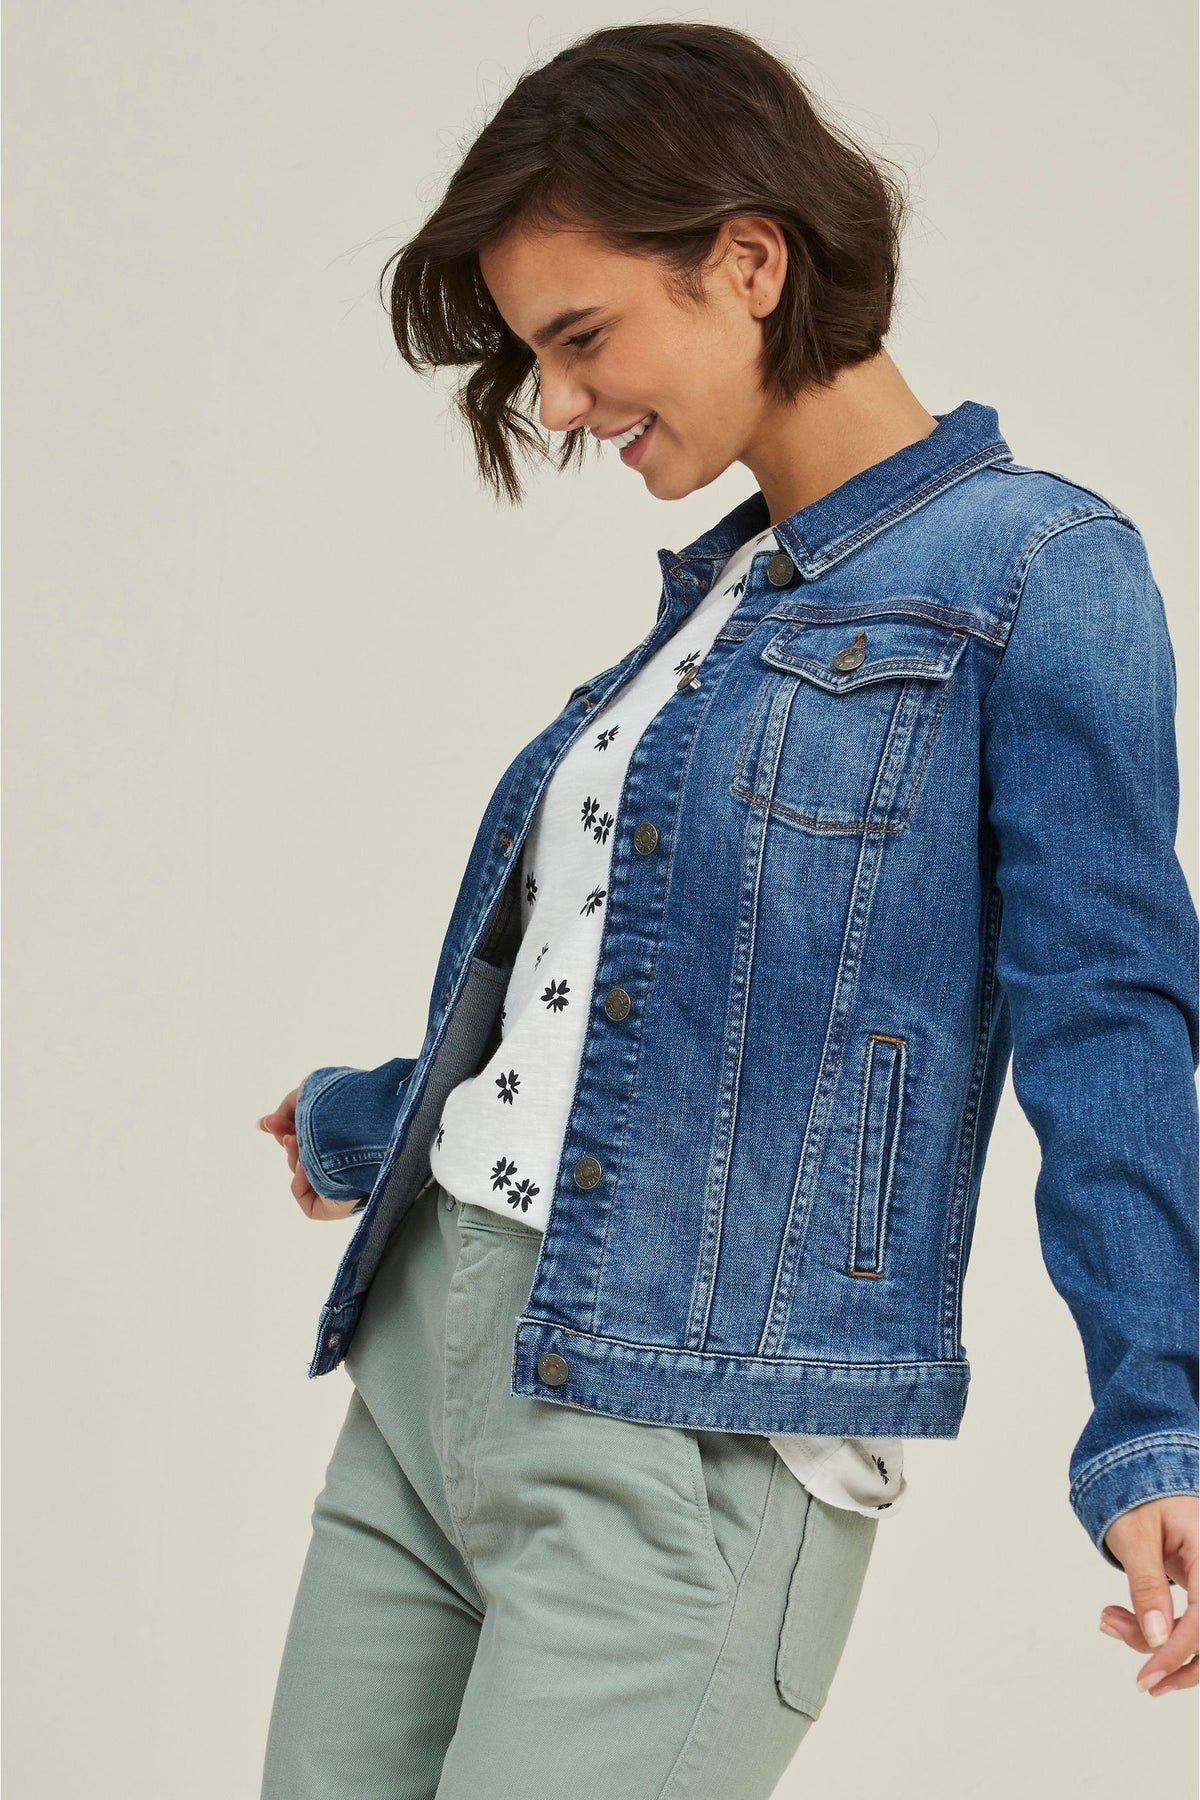 Denim jacket for stylish women, cropped blue jacket with pockets, casual and trendy outerwear